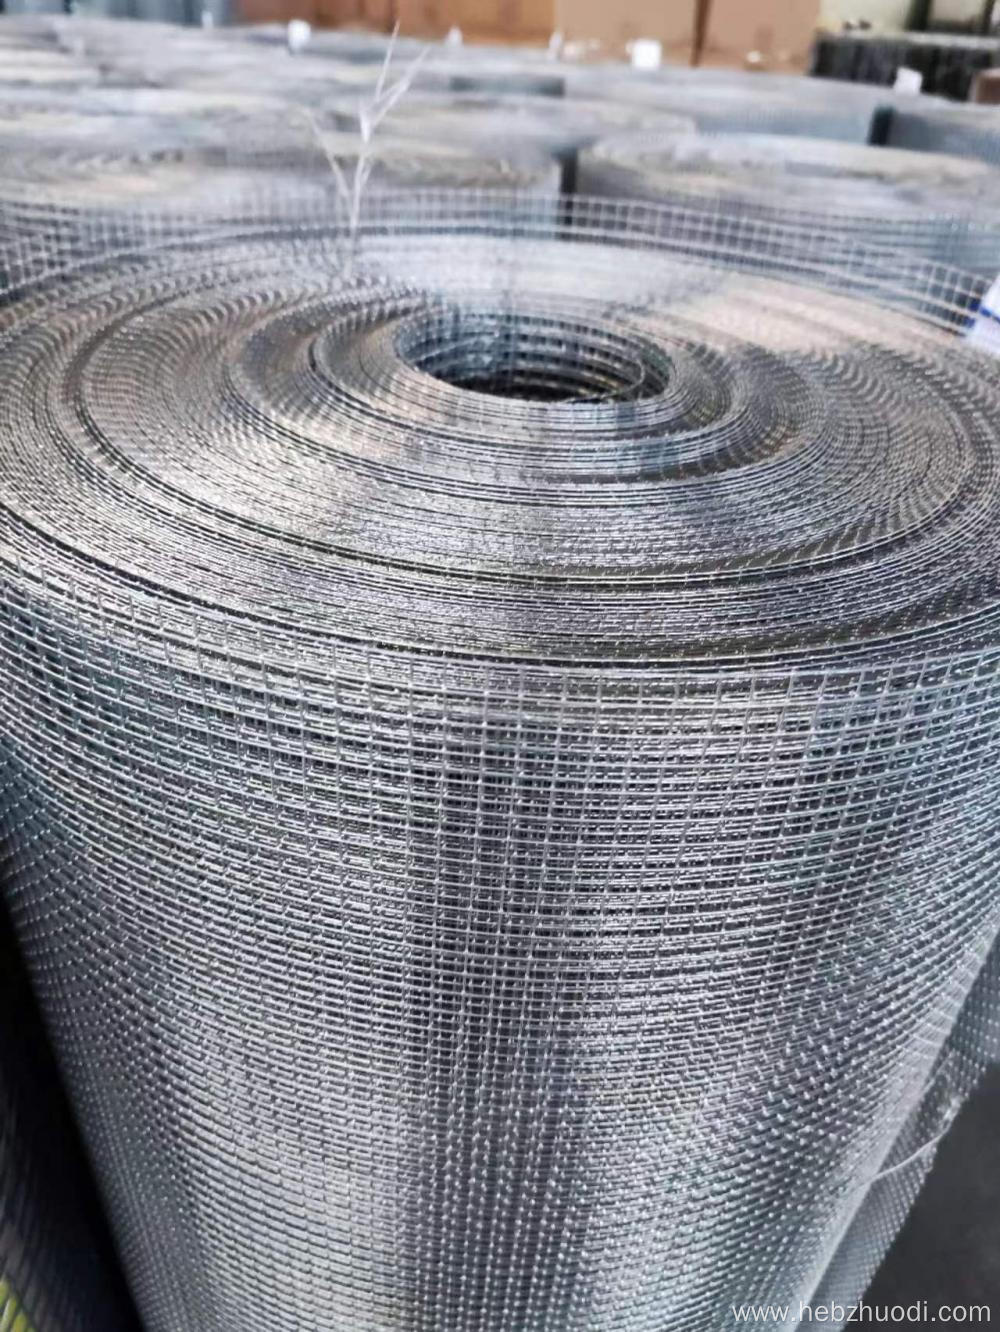 Wholesale of galvanized welded wire mesh